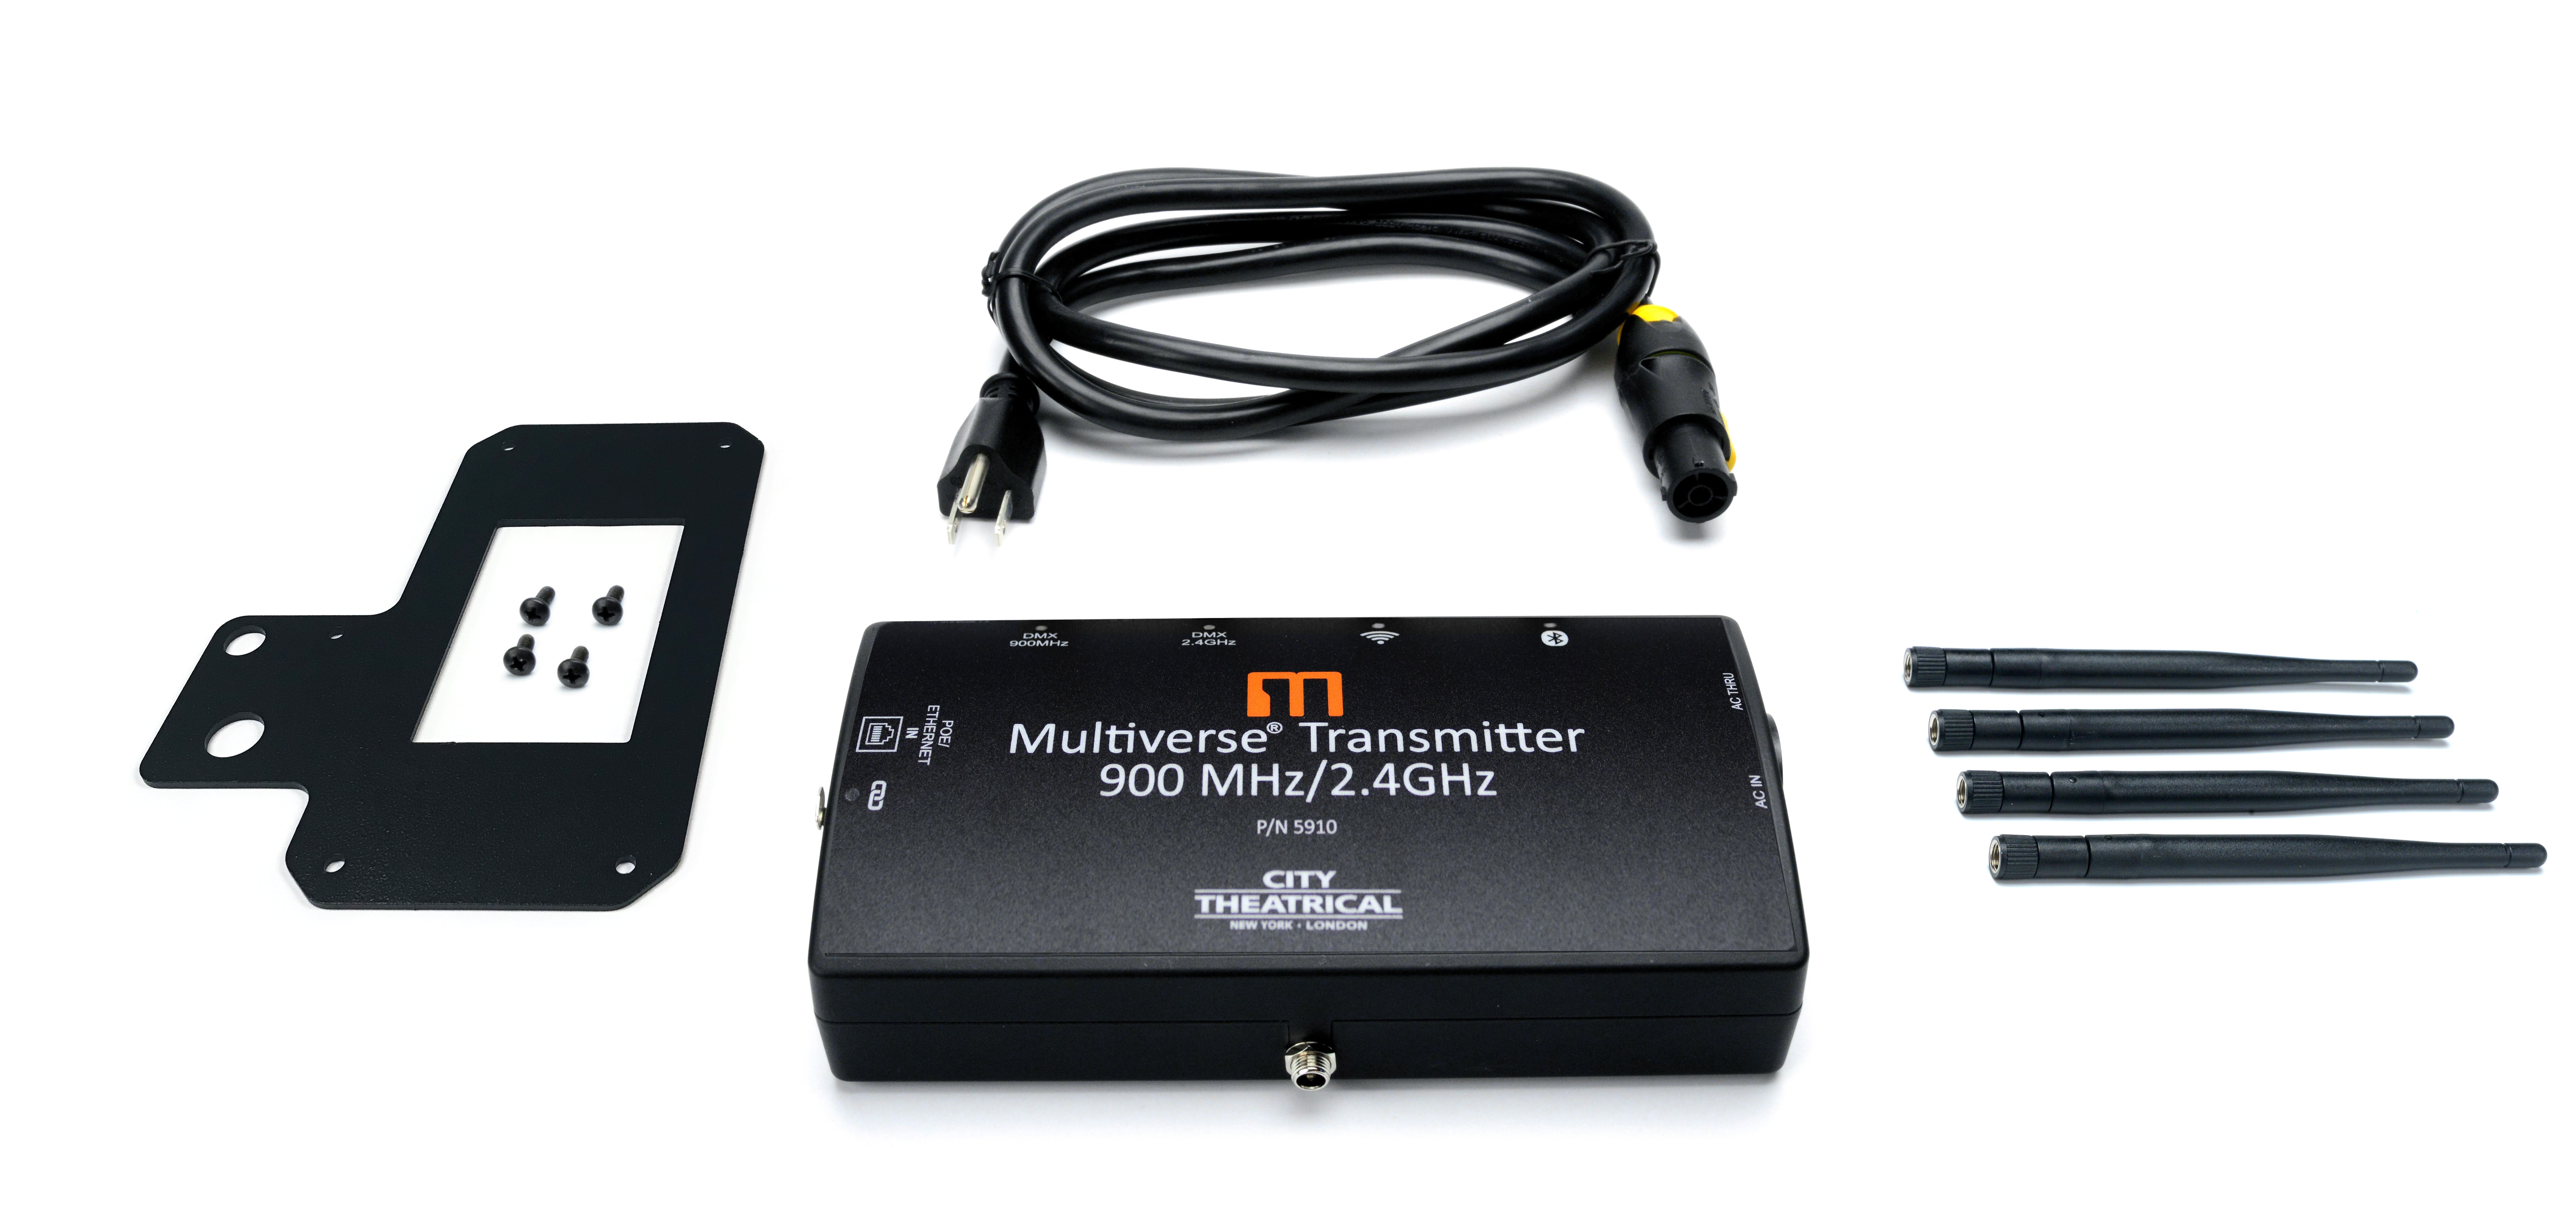 What's in the box 5910 Multiverse Transmitter 900MHz/2.4GHz